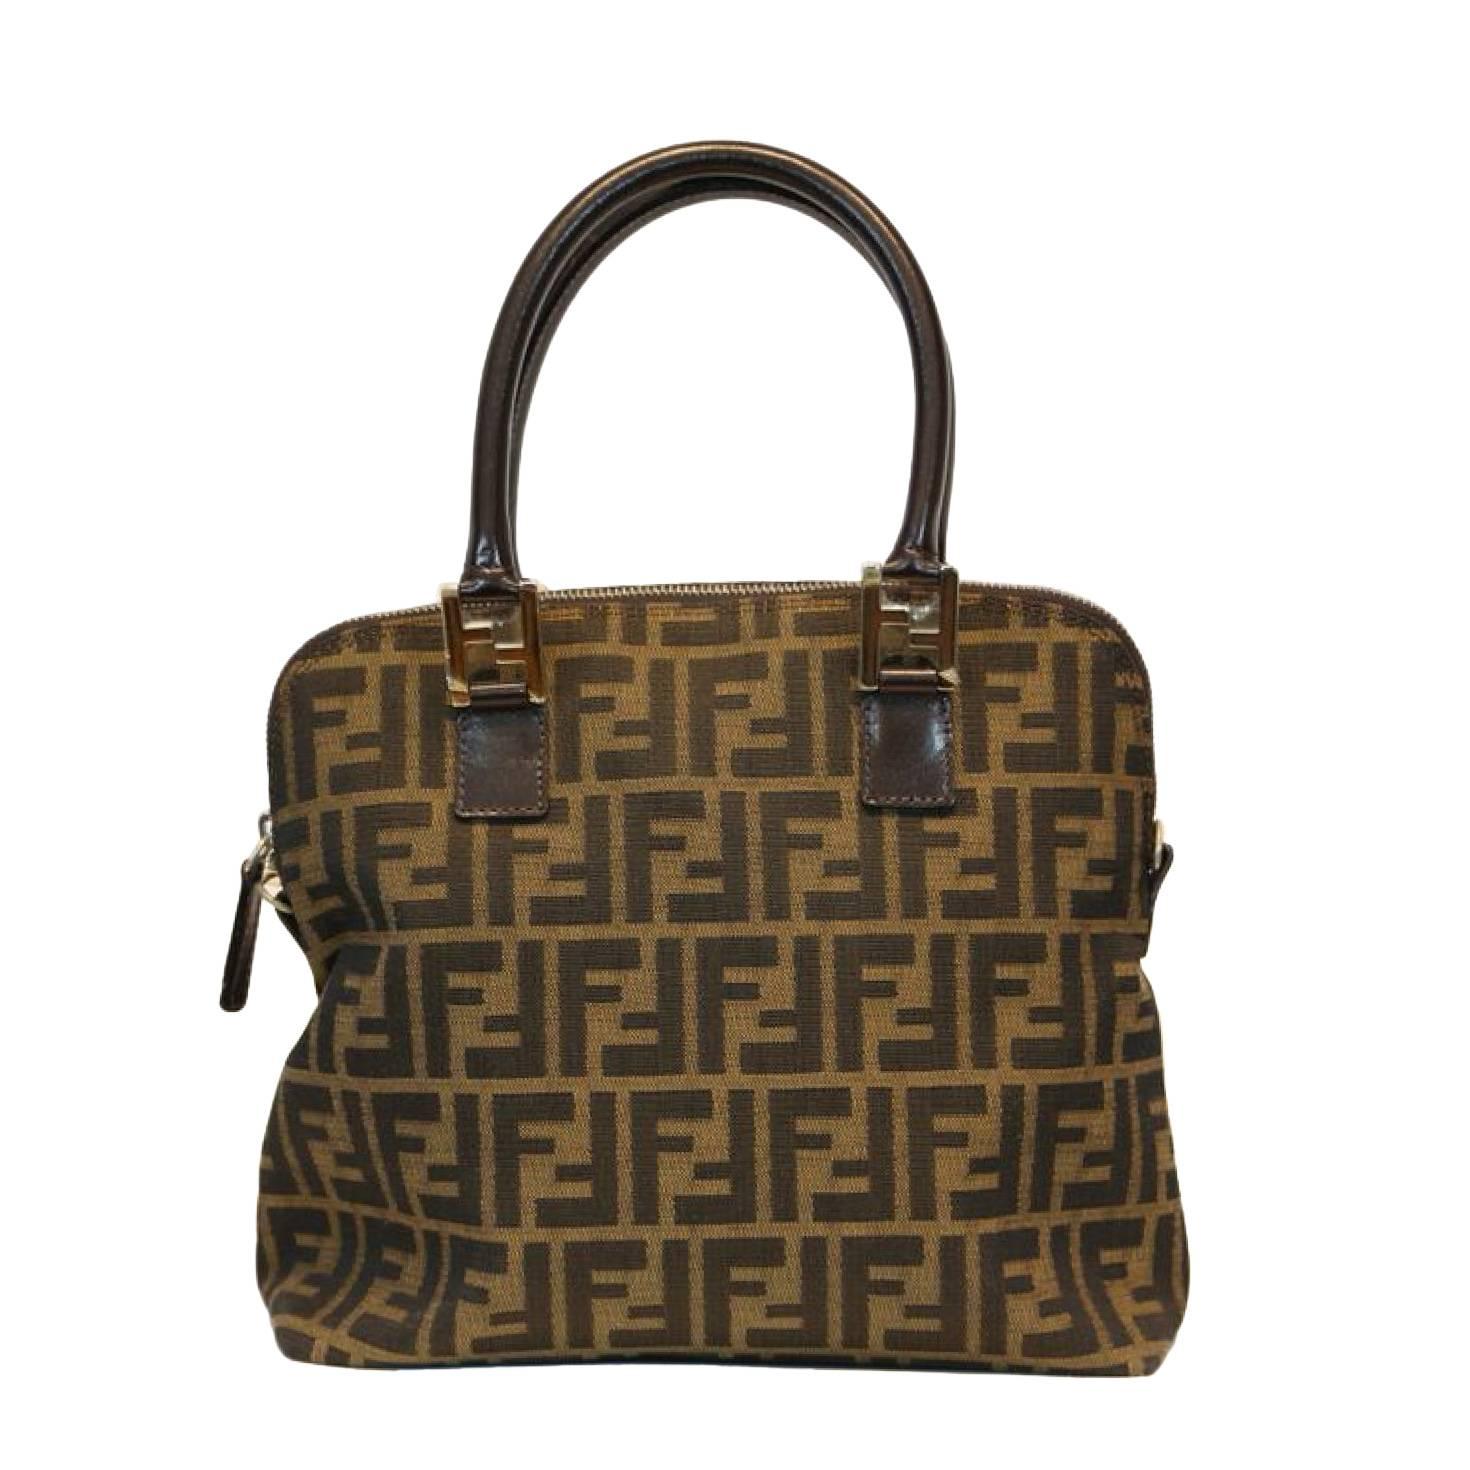 Fendi Brown Leather Handbag with Gold Embossing